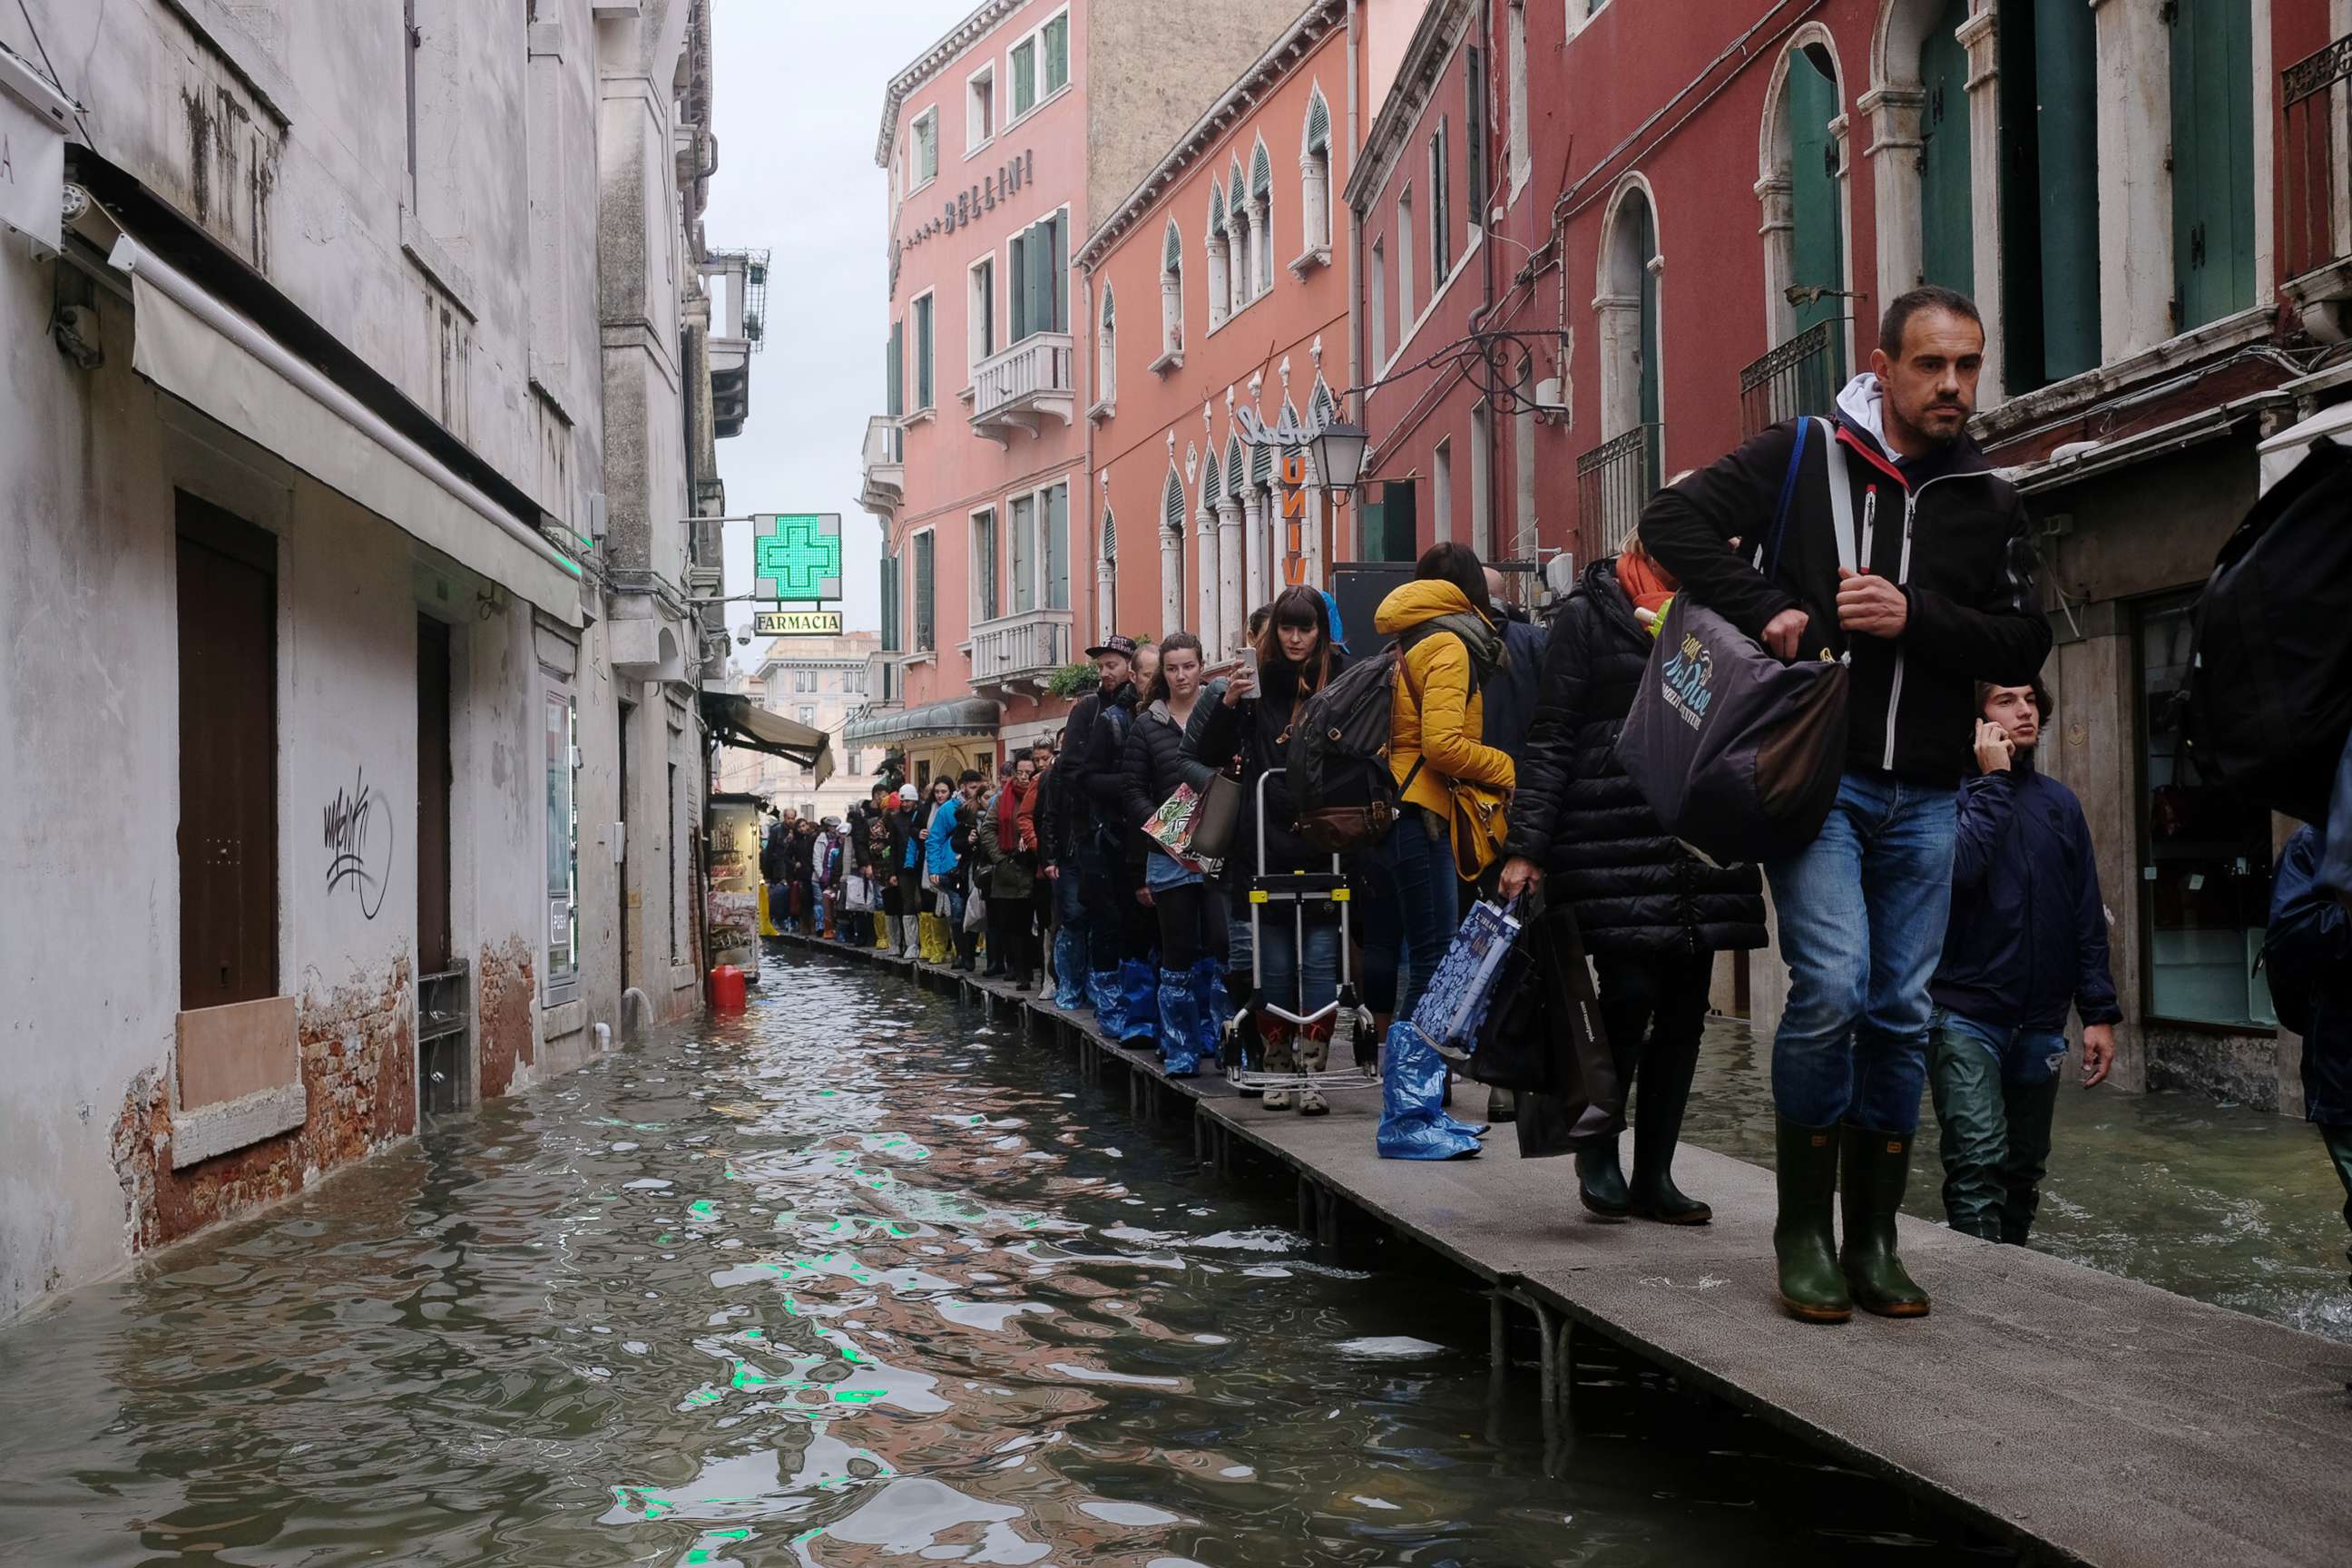 PHOTO: People walk on a catwalk in the flooded street during a period of seasonal high water in Venice, Italy, Nov. 15, 2019.